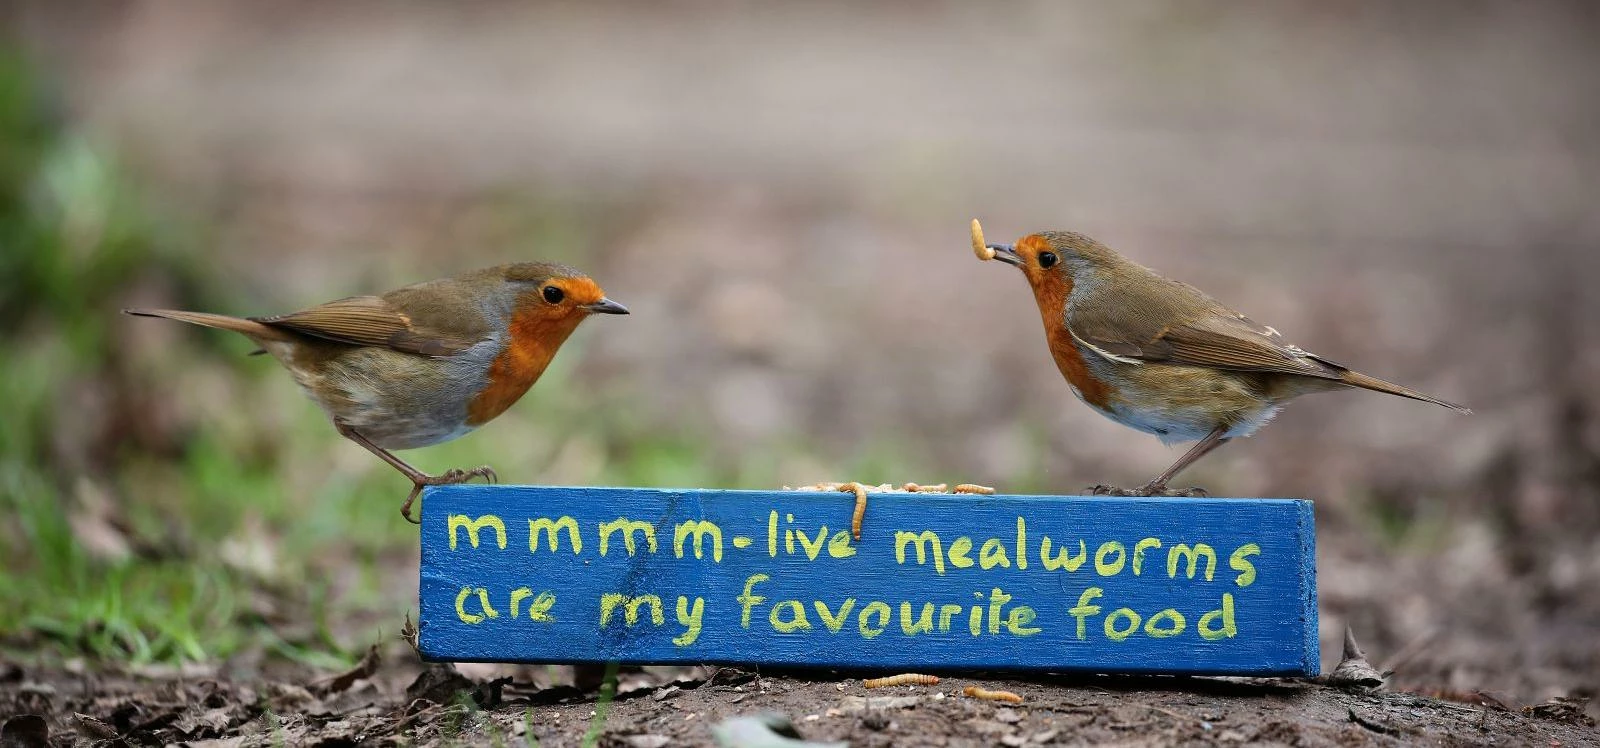 Robins and mealworms cpt Vine House Farm